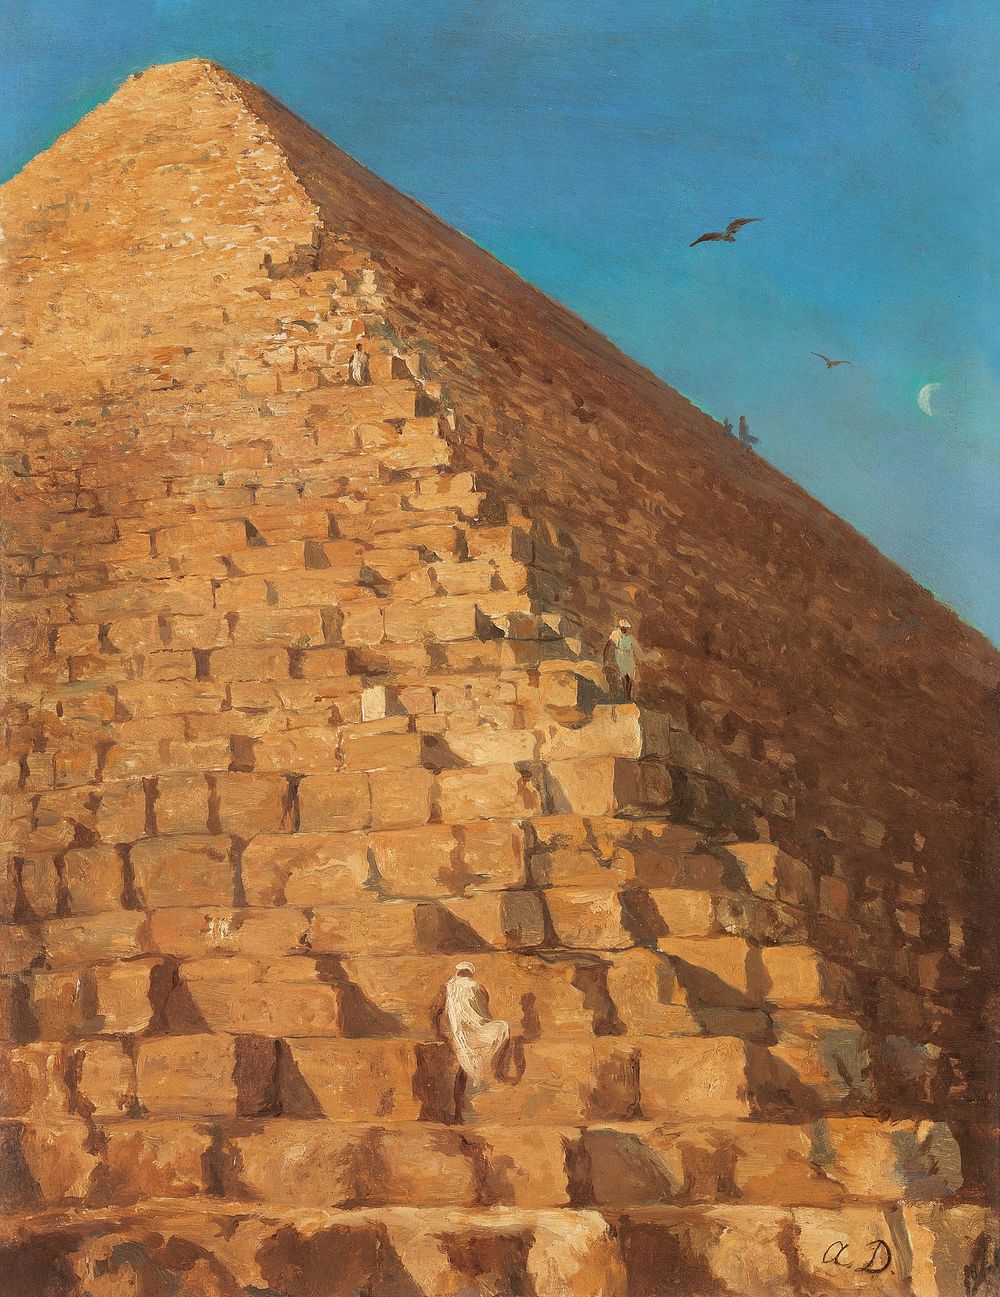 The Great Pyramid by Giza (1830)  by Adrien Dauzats. Original public domain image from The MET Museum. Digitally enhanced by…